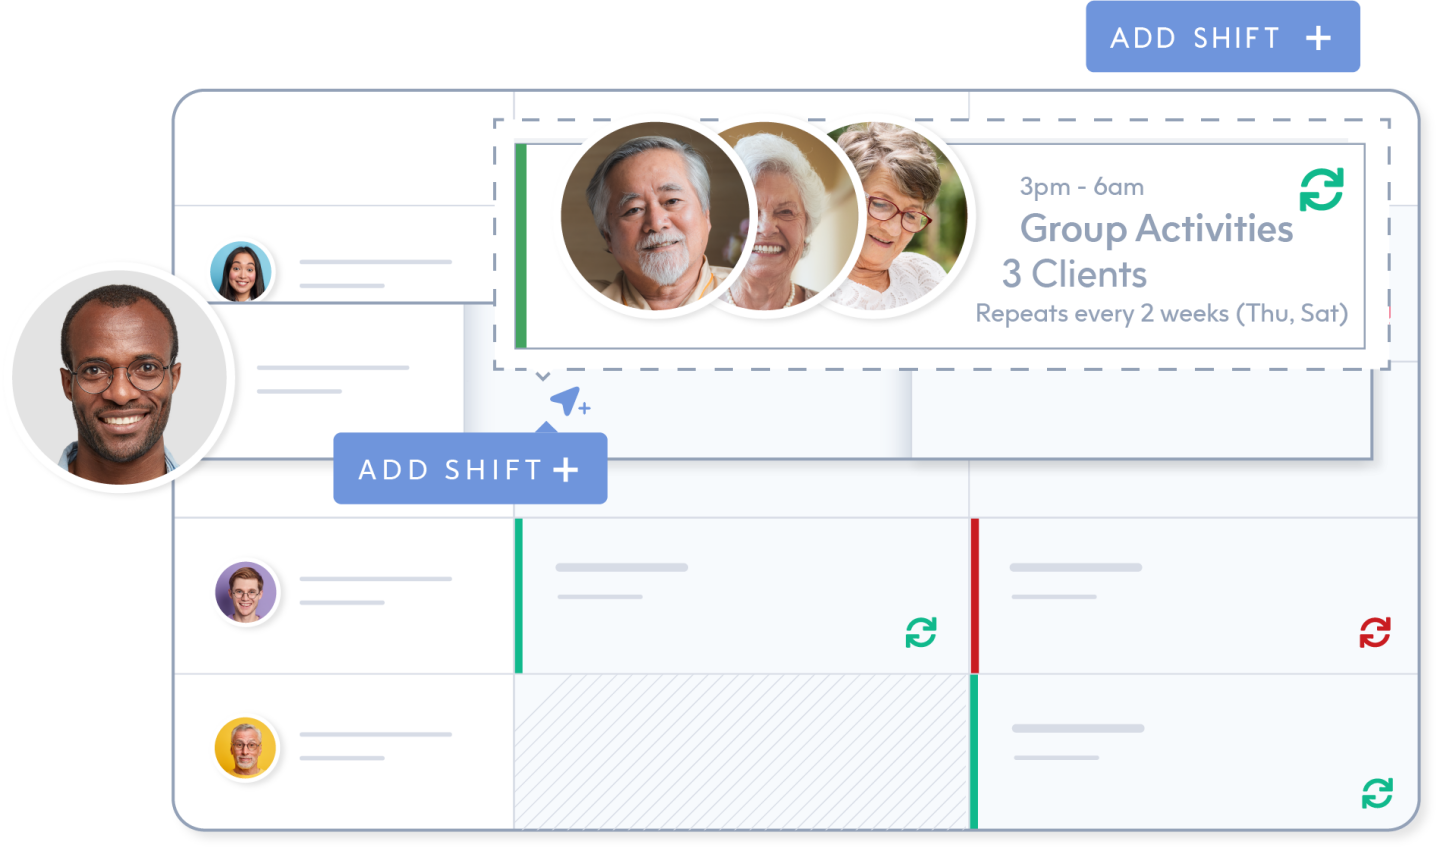 Assigning shifts for multiple aged care clients to a worker using ShiftCare's rostering function